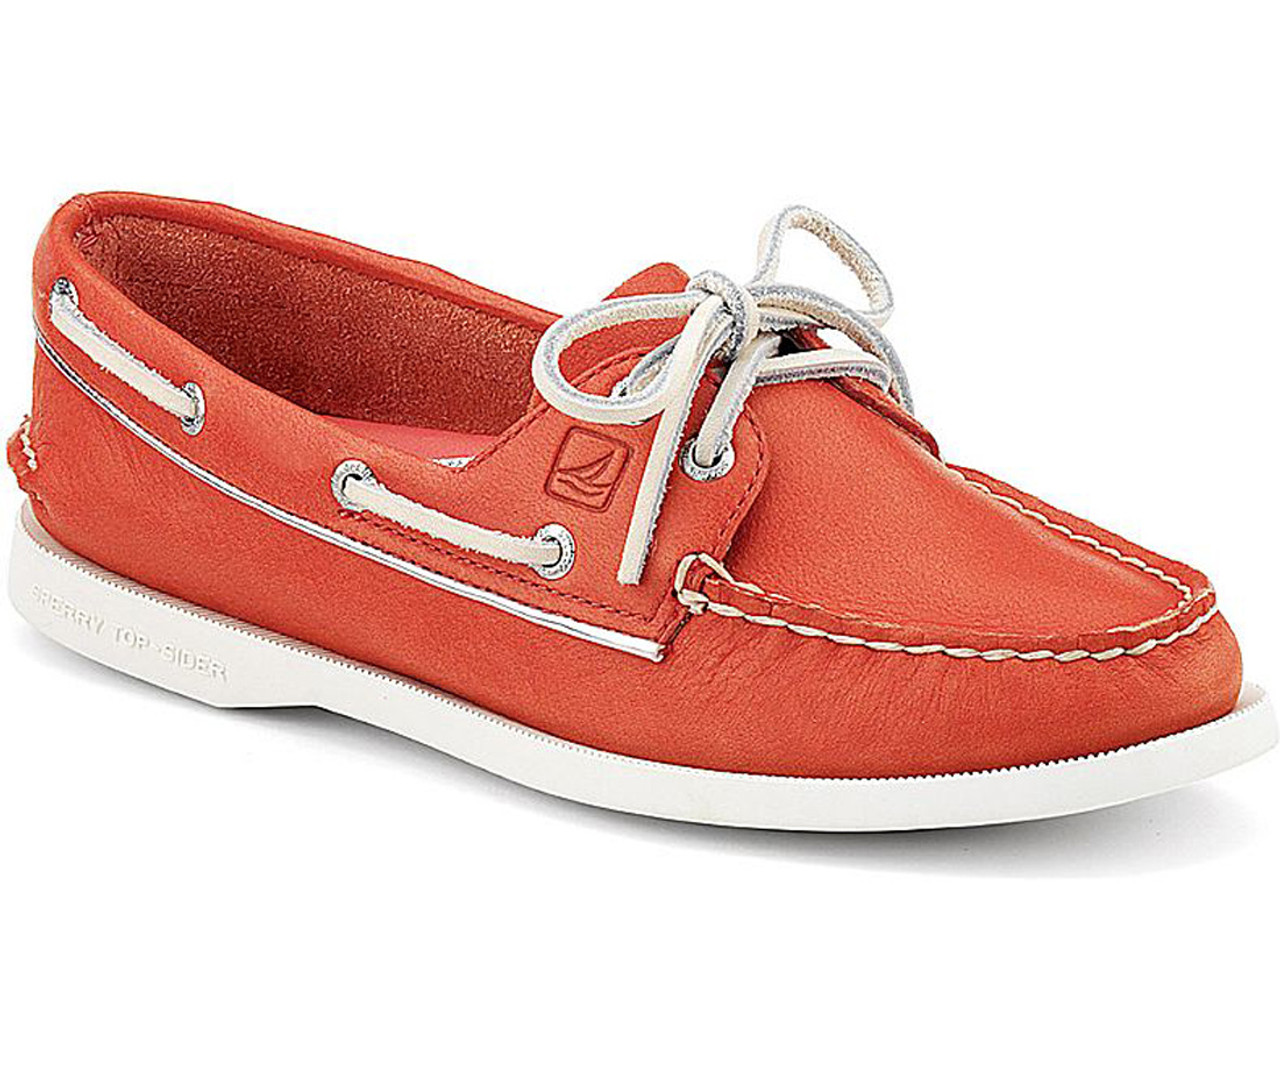 Sperry Women's A/O Boat Shoes - Red | Discount Sperry Ladies Shoes & More -   